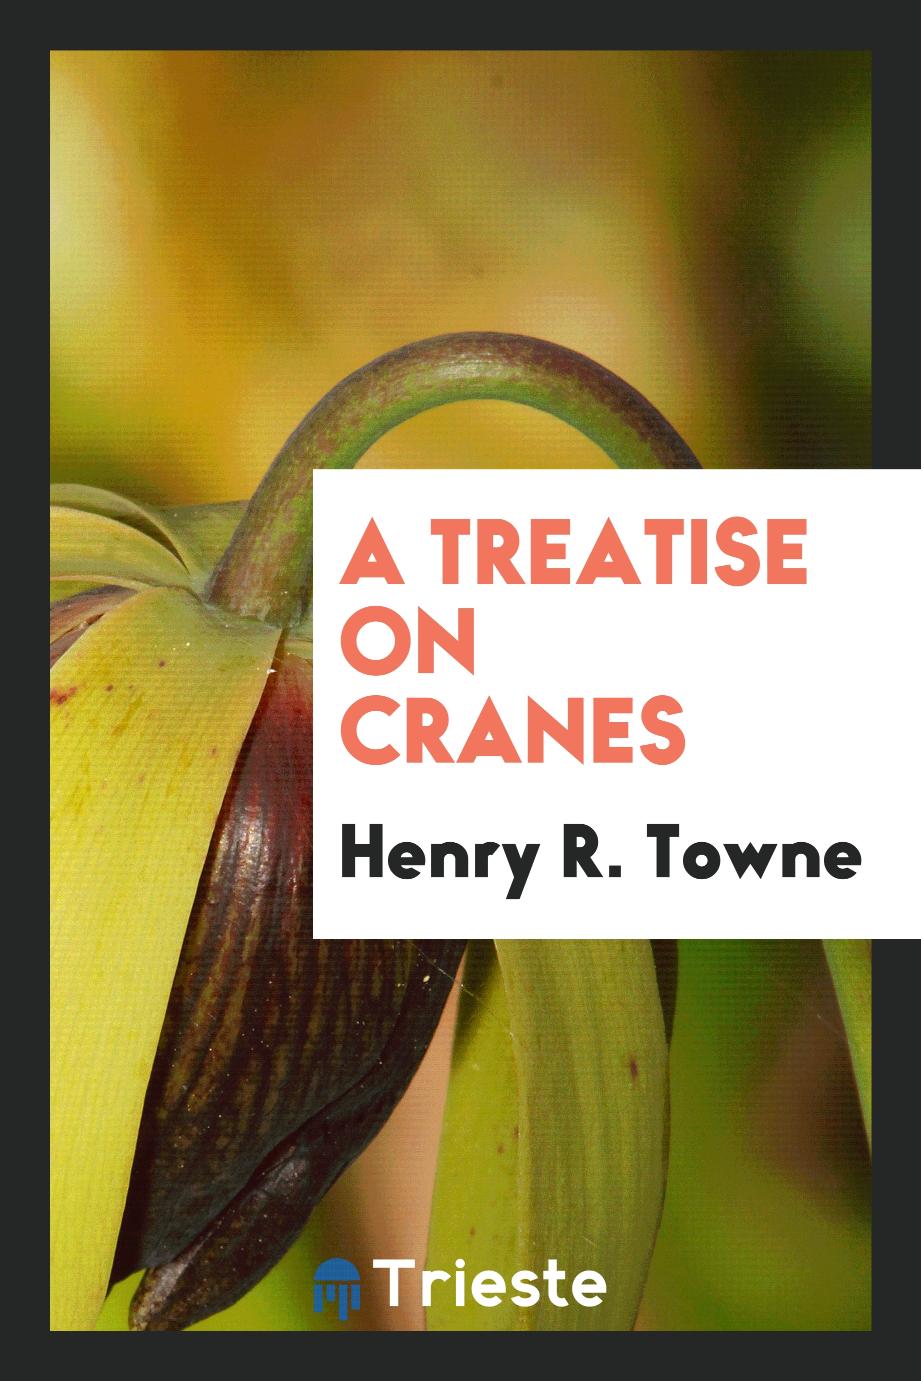 A treatise on cranes